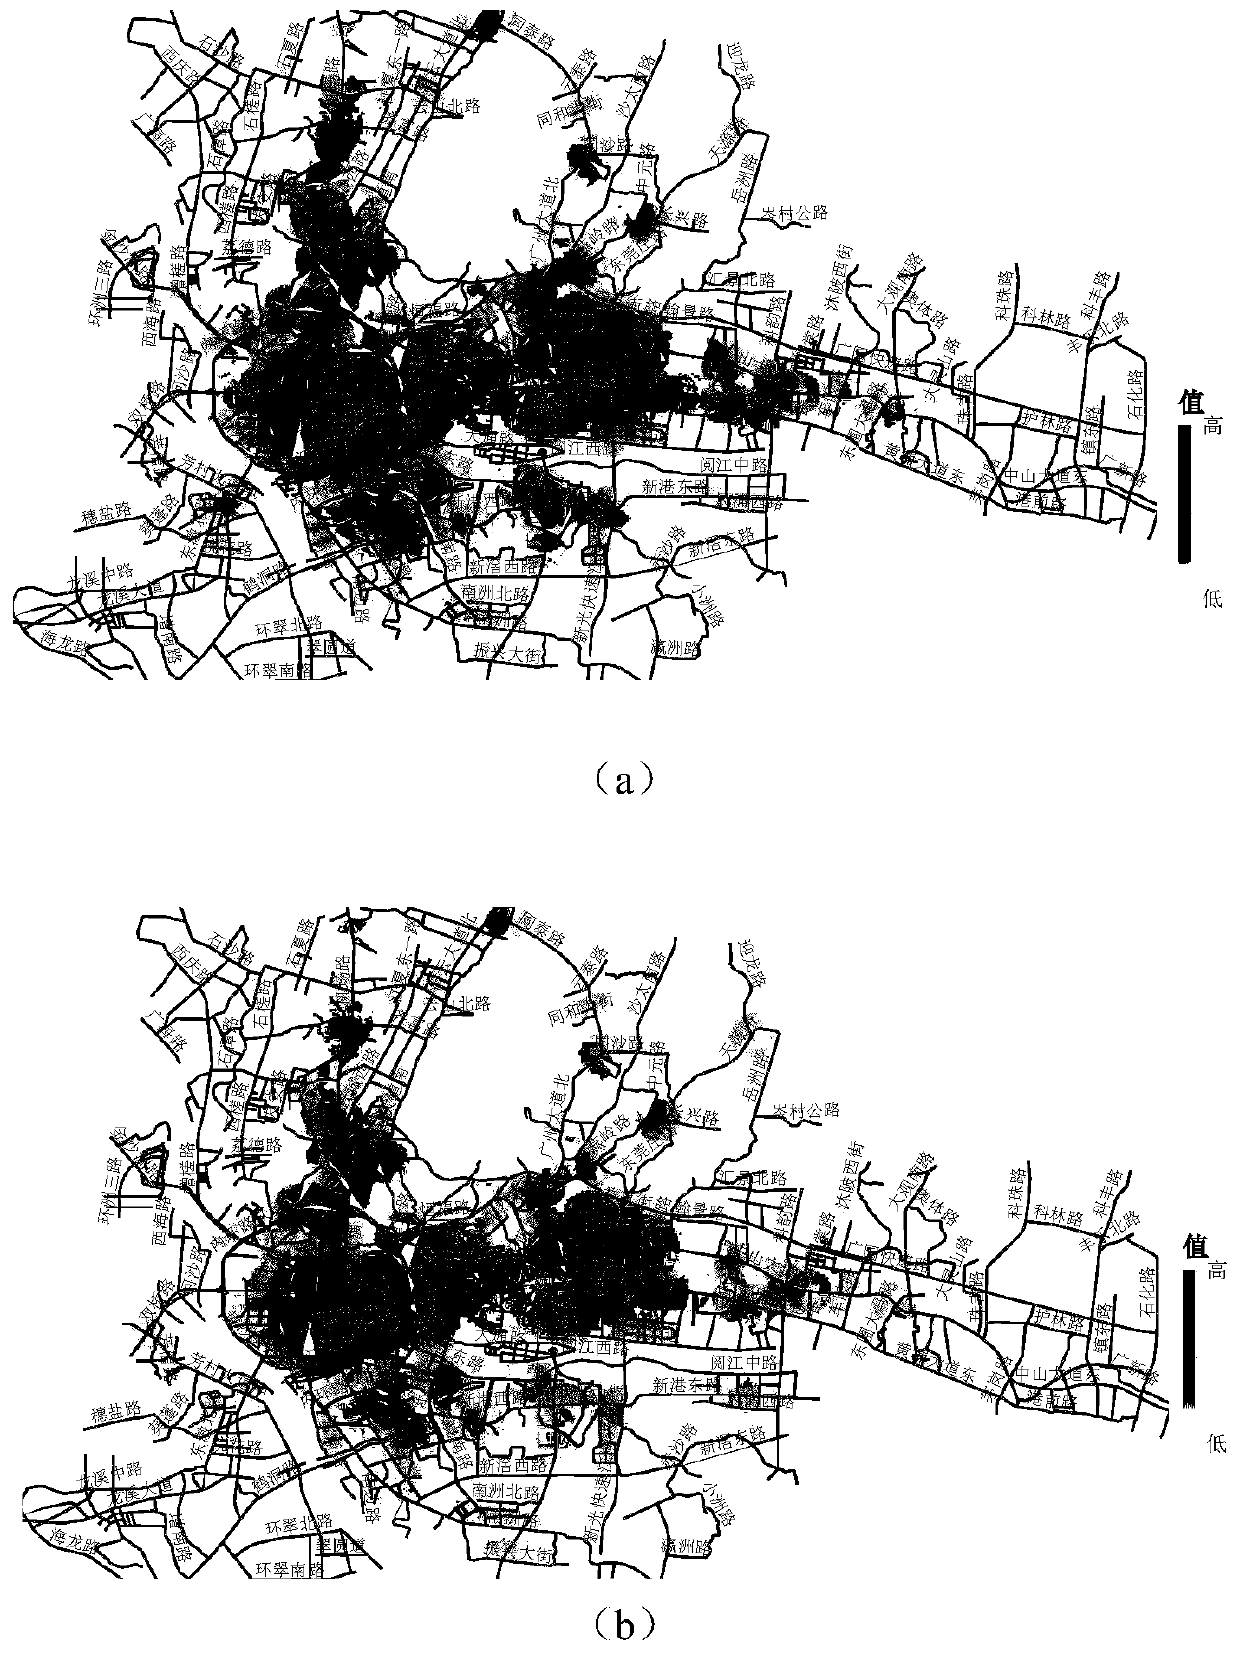 A Method for Extracting Important Intersections of Road Network Based on Floating Car Data